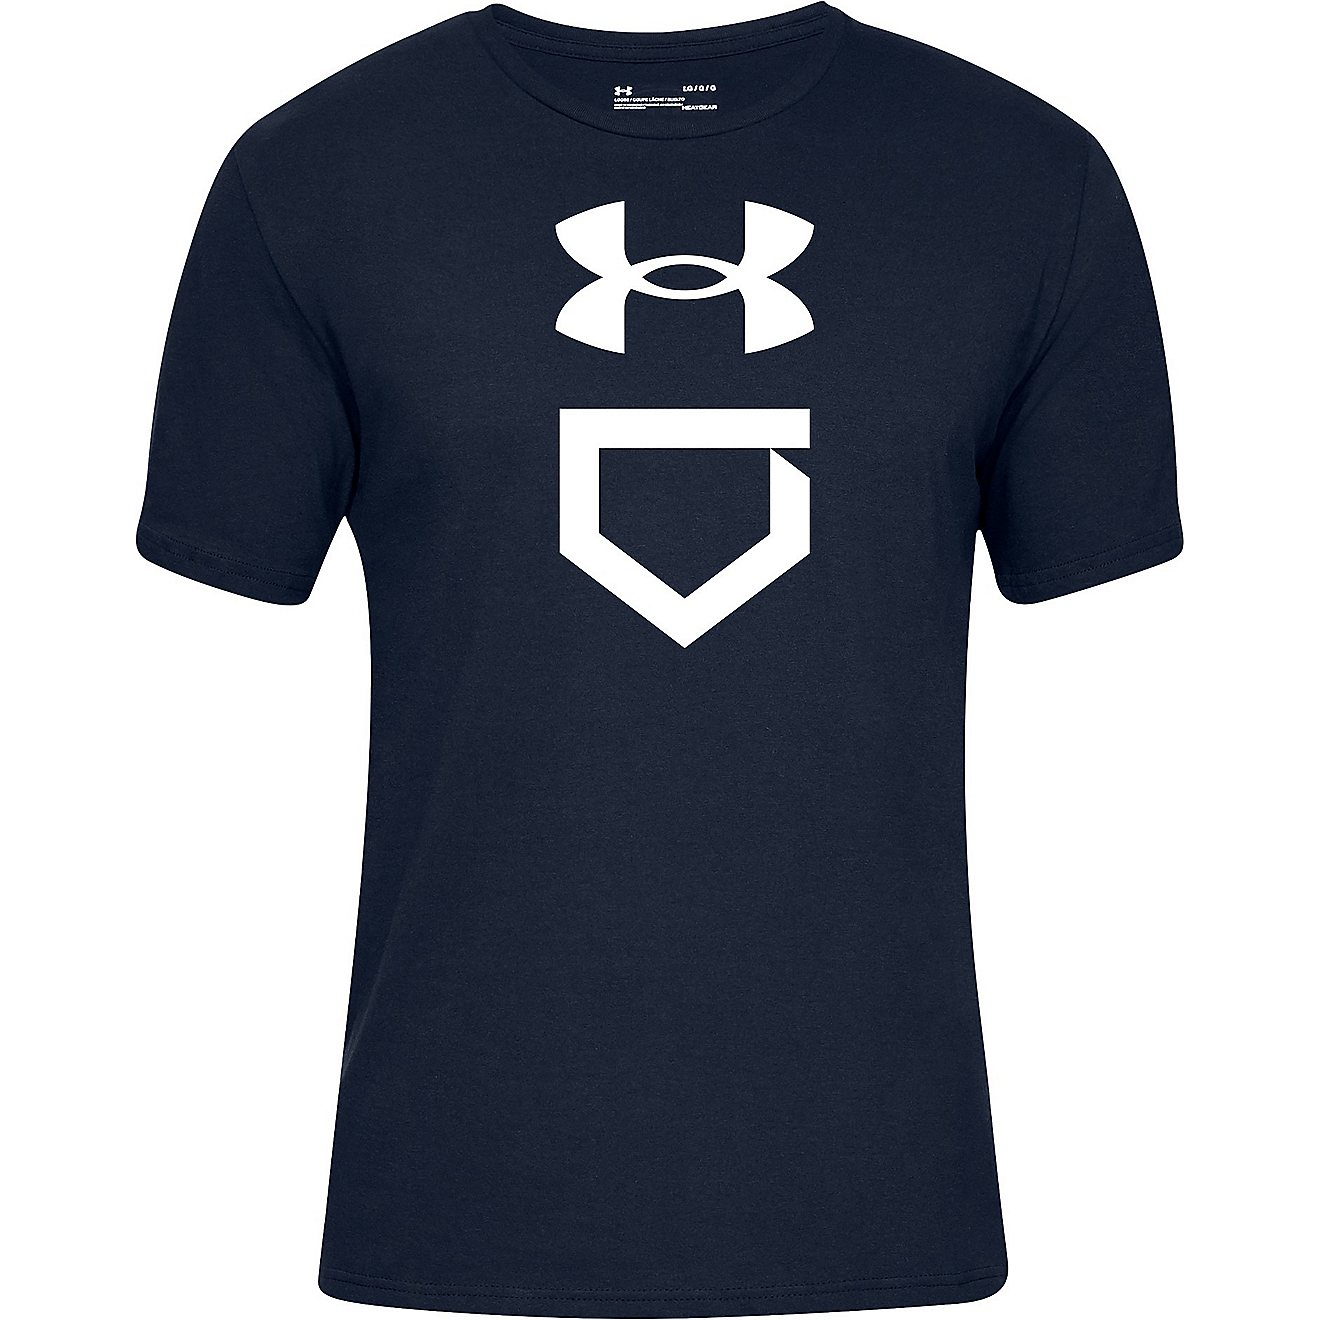 Under Armour Mens Plate icon Short Sleeve tee